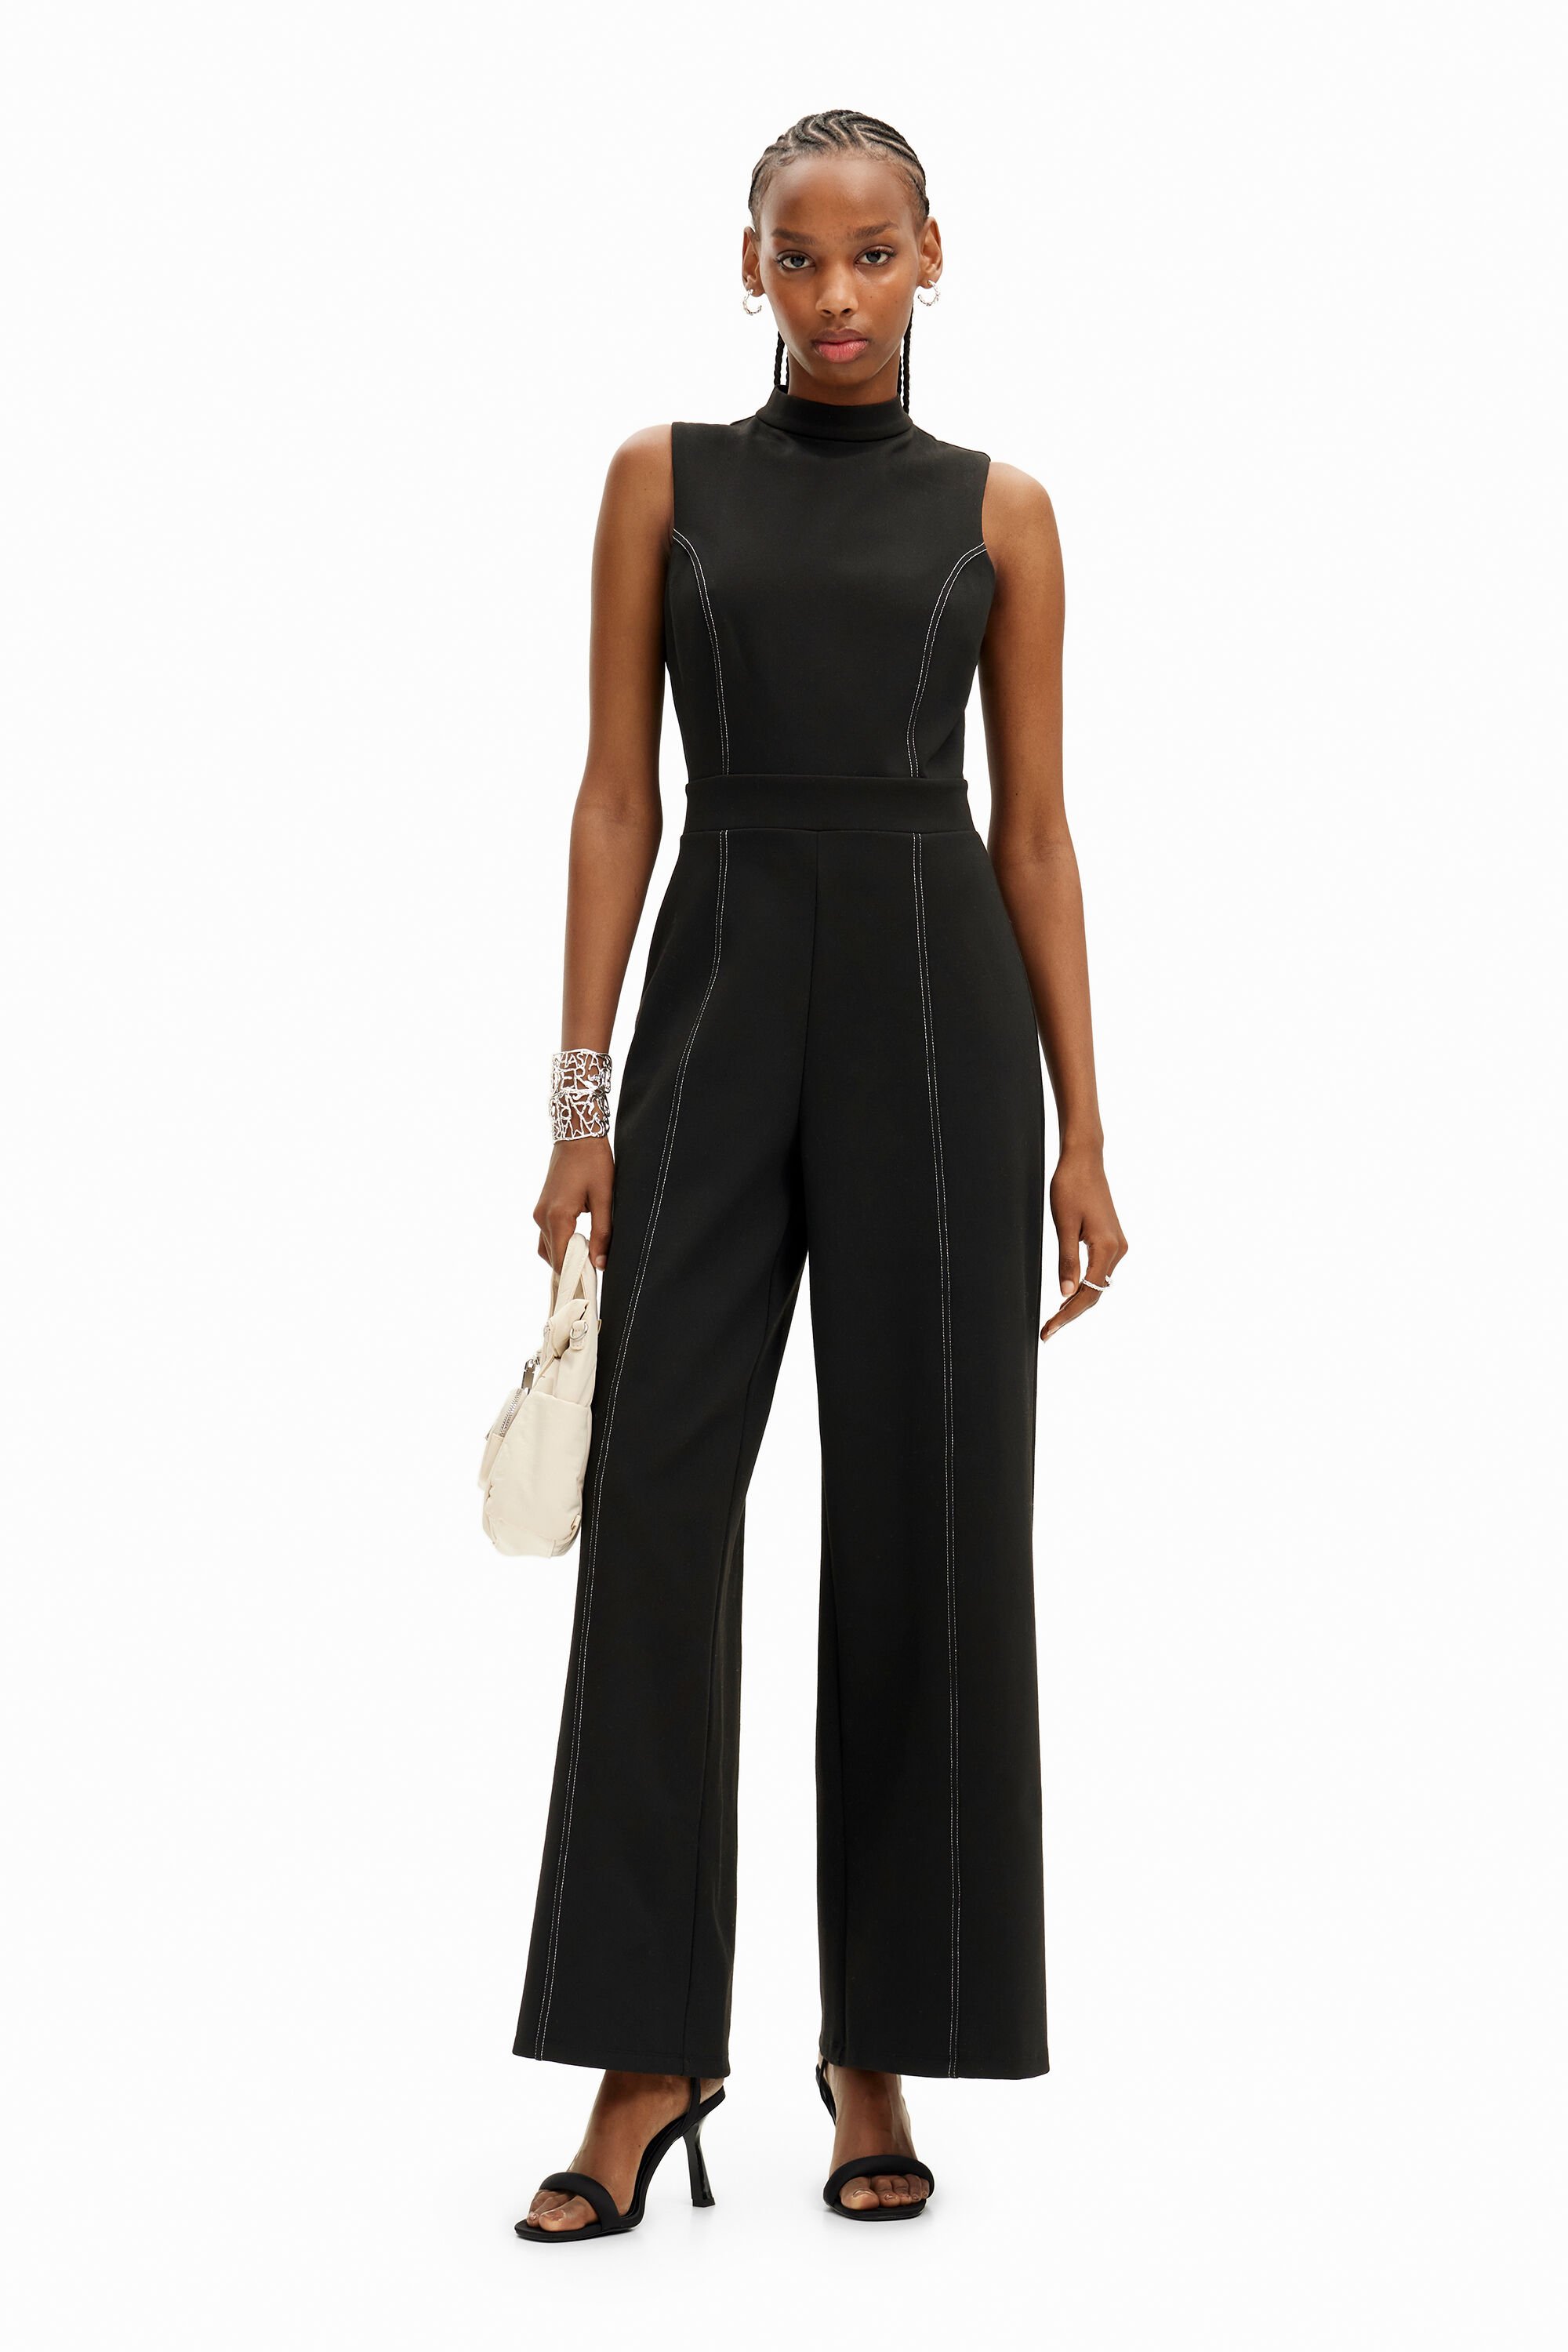 Desigual Culotte jumpsuit with stitching